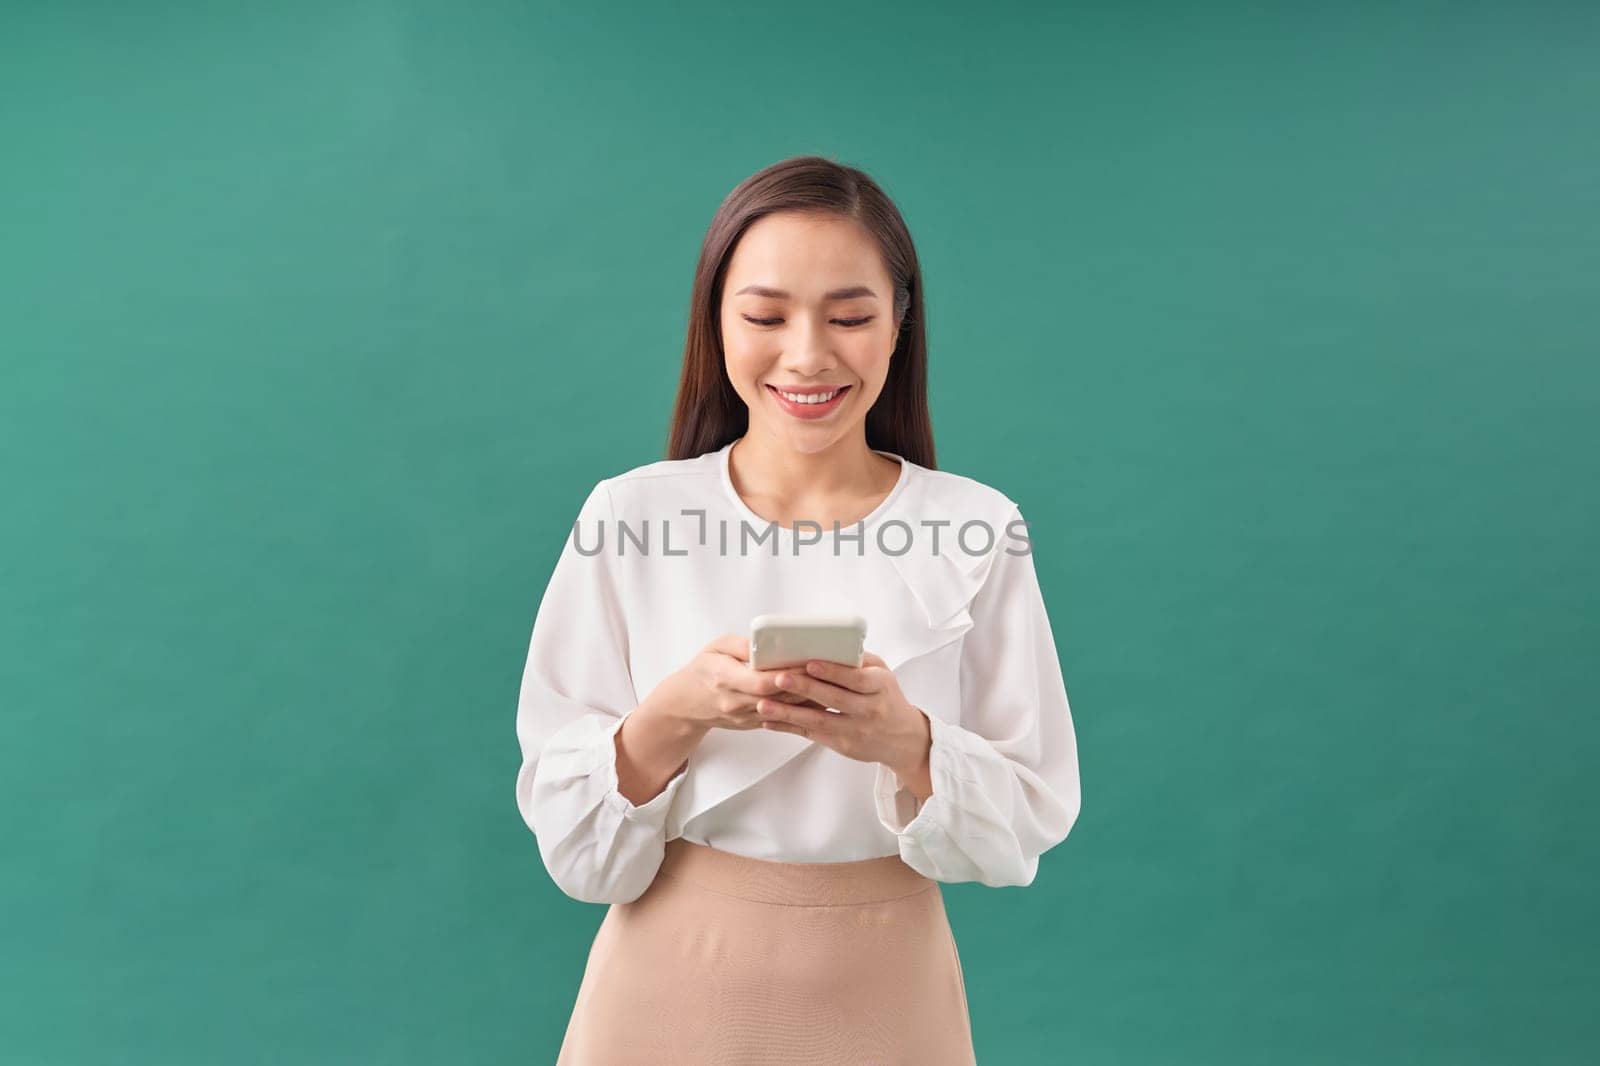 Portrait of a smiling casual woman holding smartphone over green background